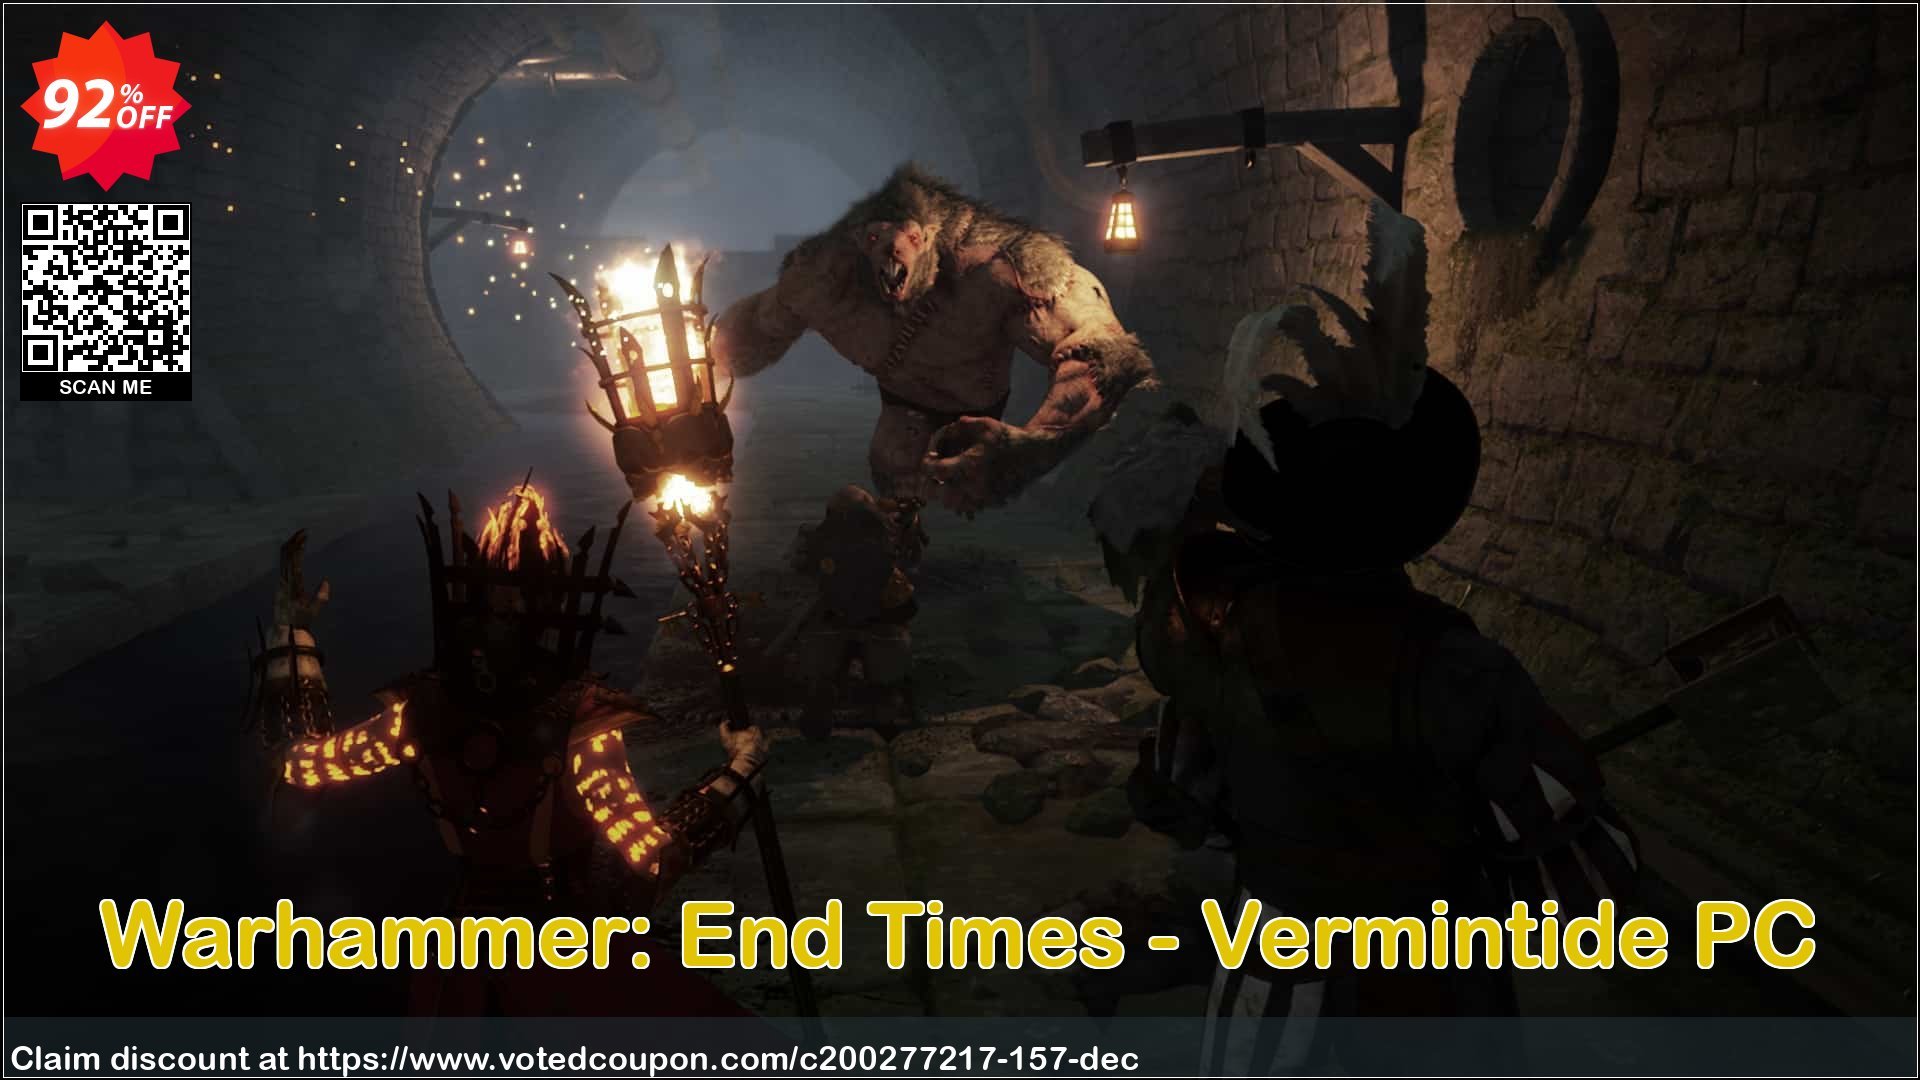 Warhammer: End Times - Vermintide PC Coupon Code Apr 2024, 92% OFF - VotedCoupon